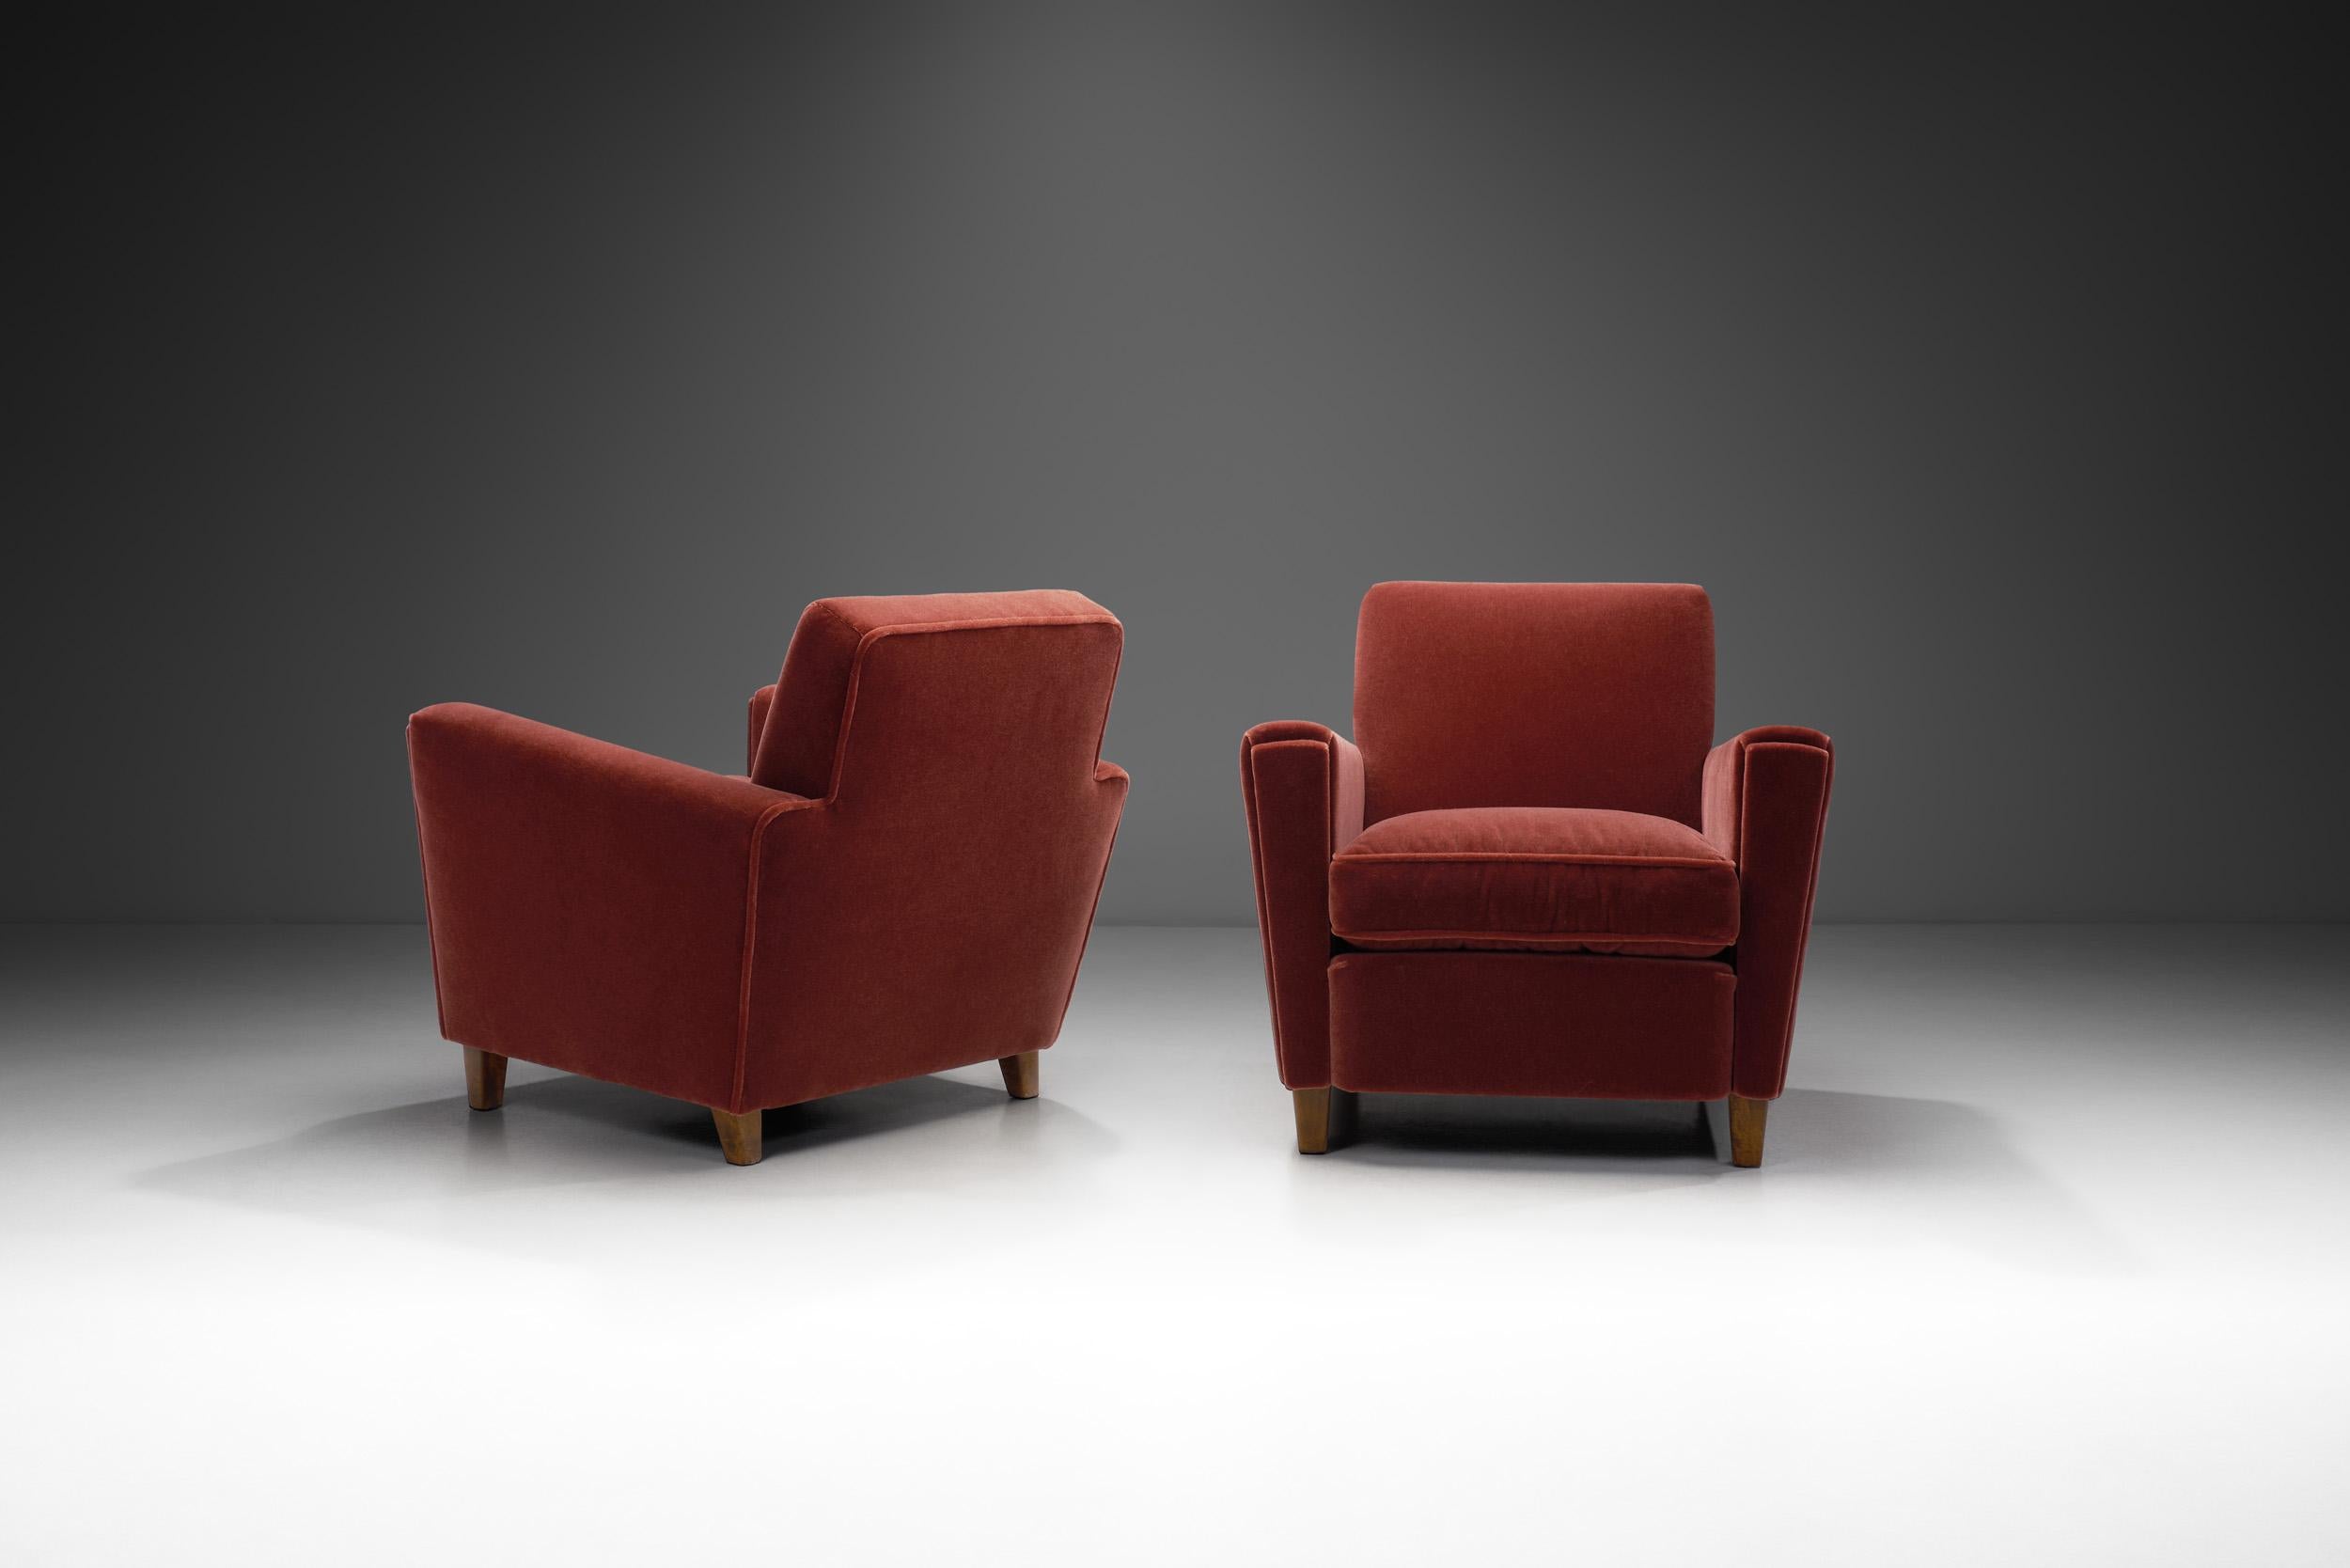 Mid-20th Century European Modern Upholstered Armchairs with Tapered Wood Feet, Europe, 1940s